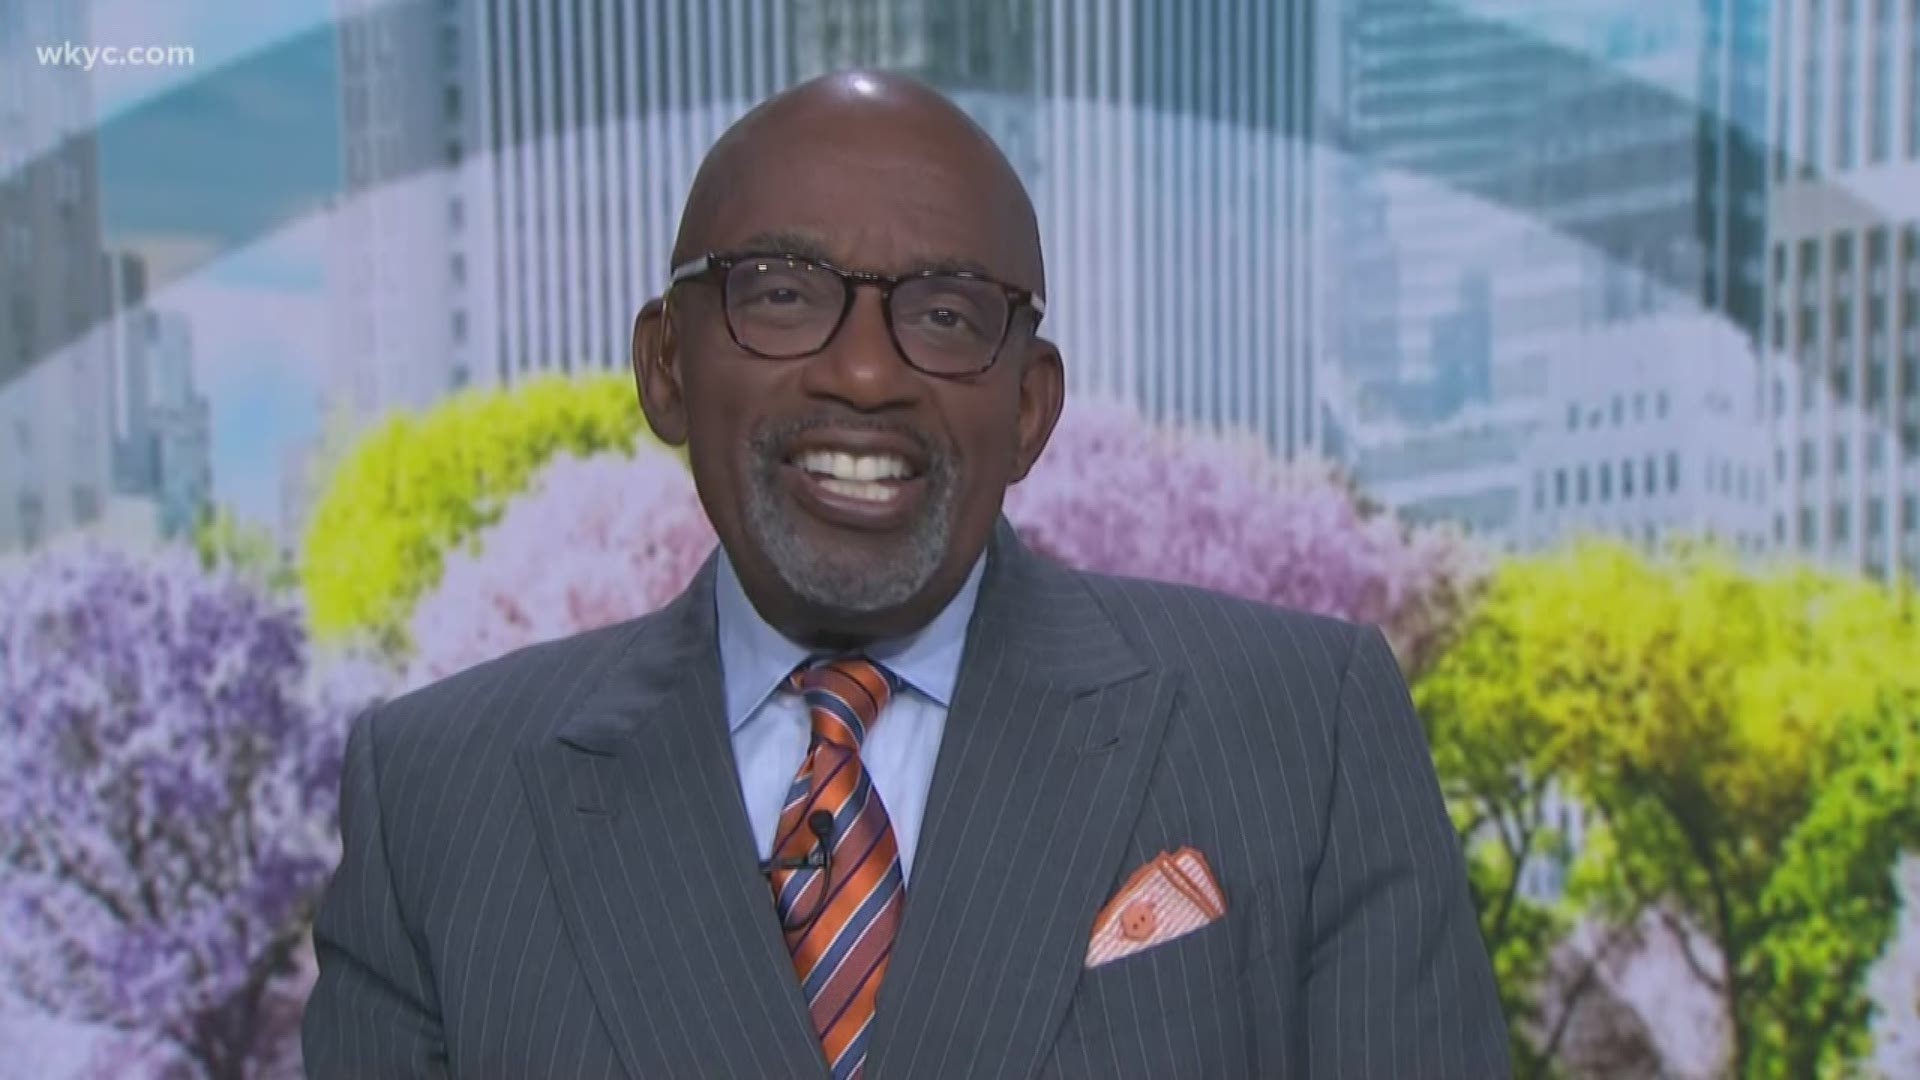 Sept. 9, 2019: It wasn't the outcome any Browns fan was hoping for, but it's important to remember that Sunday's loss was just the first game. Al Roker, who once lived in Cleveland, shared his positive thoughts with us about the Browns and why we shouldn't be too worried about the game one loss.